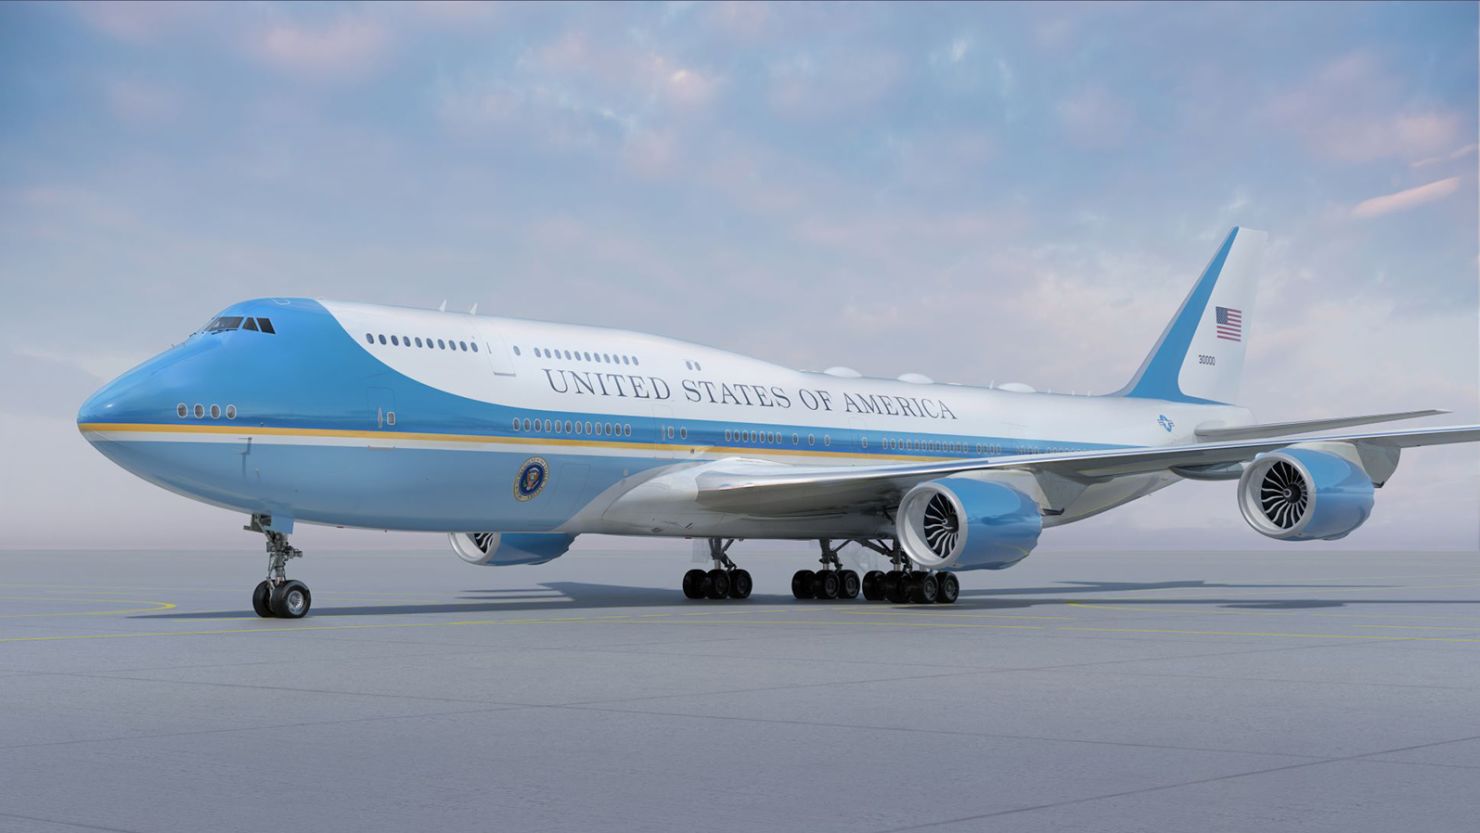 New color scheme unveiled for Air Force One that discards Trump's design